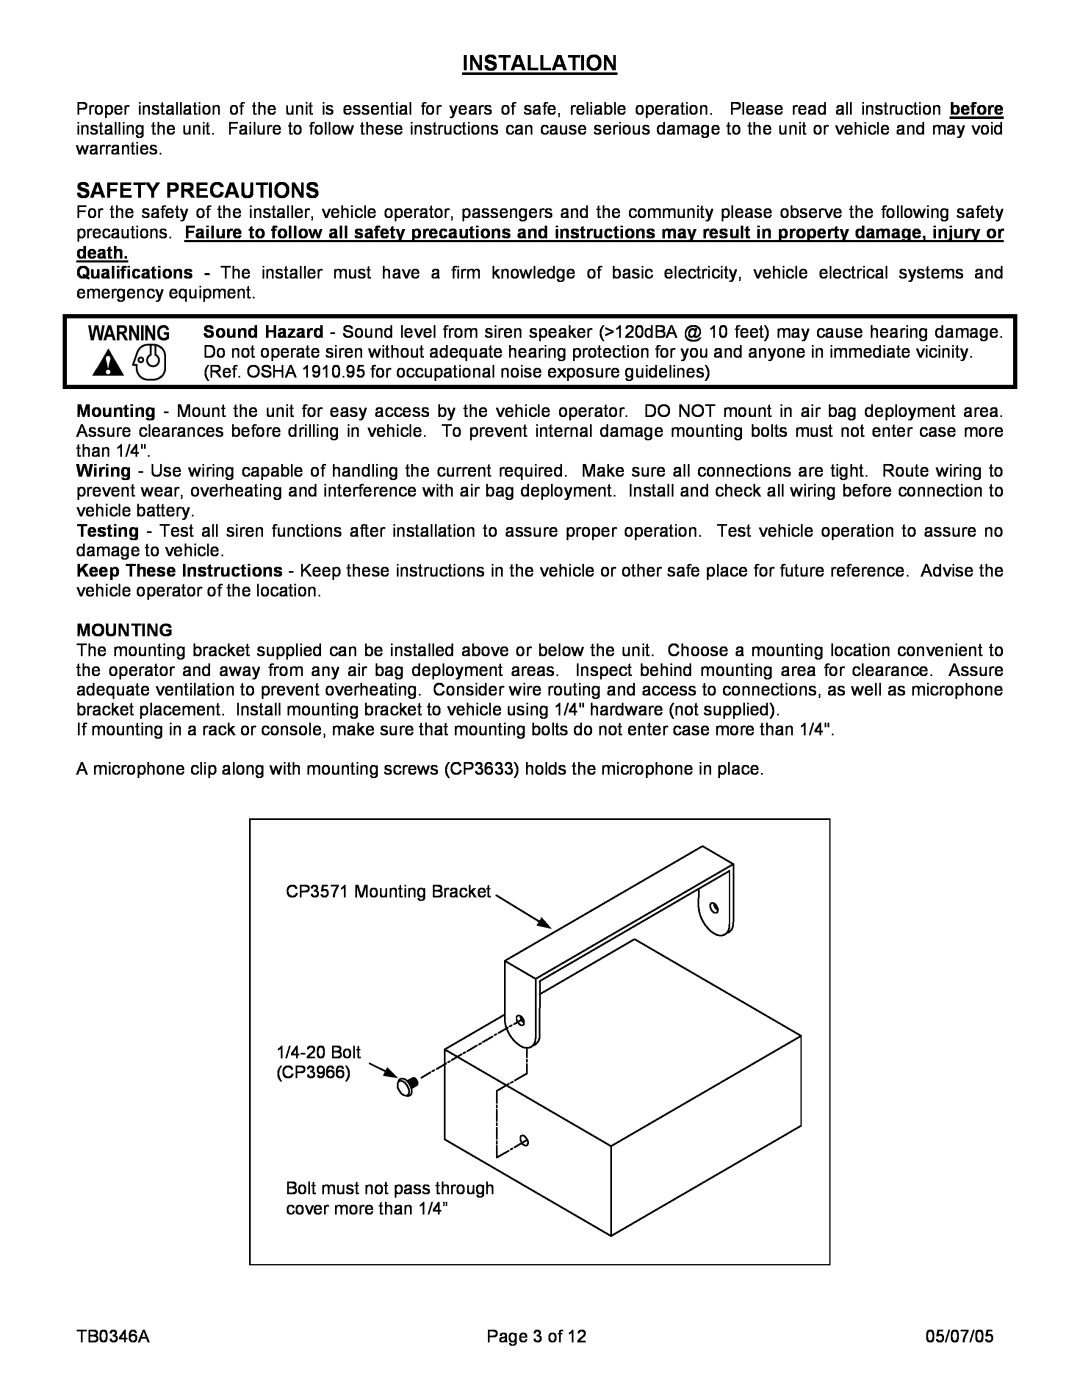 Carson SC-407-10 manual Installation, Safety Precautions, Mounting 